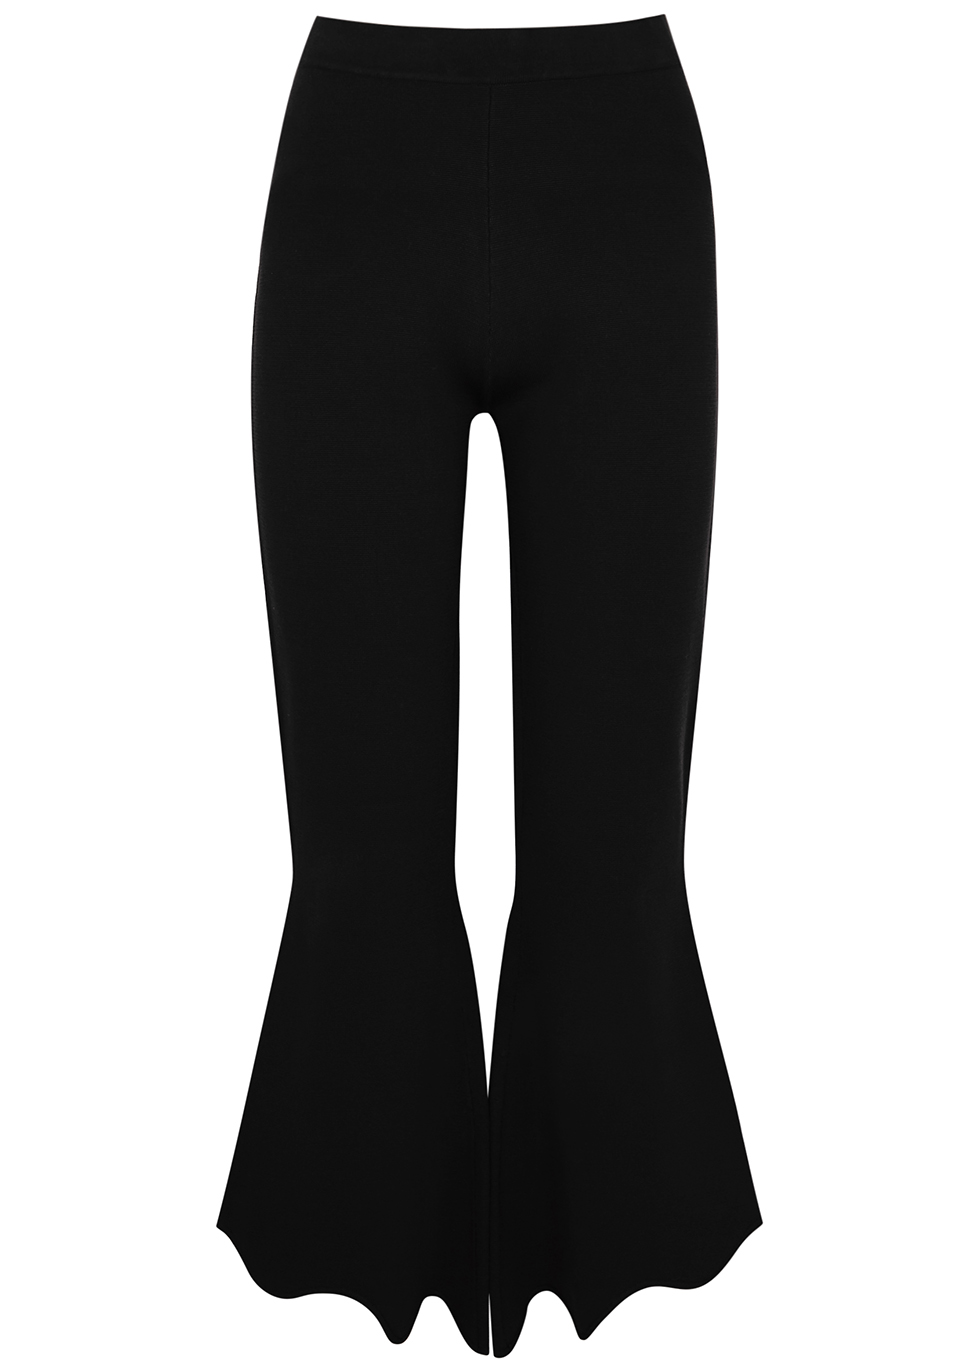 BY MALENE BIRGER Vivion black knitted scalloped trousers